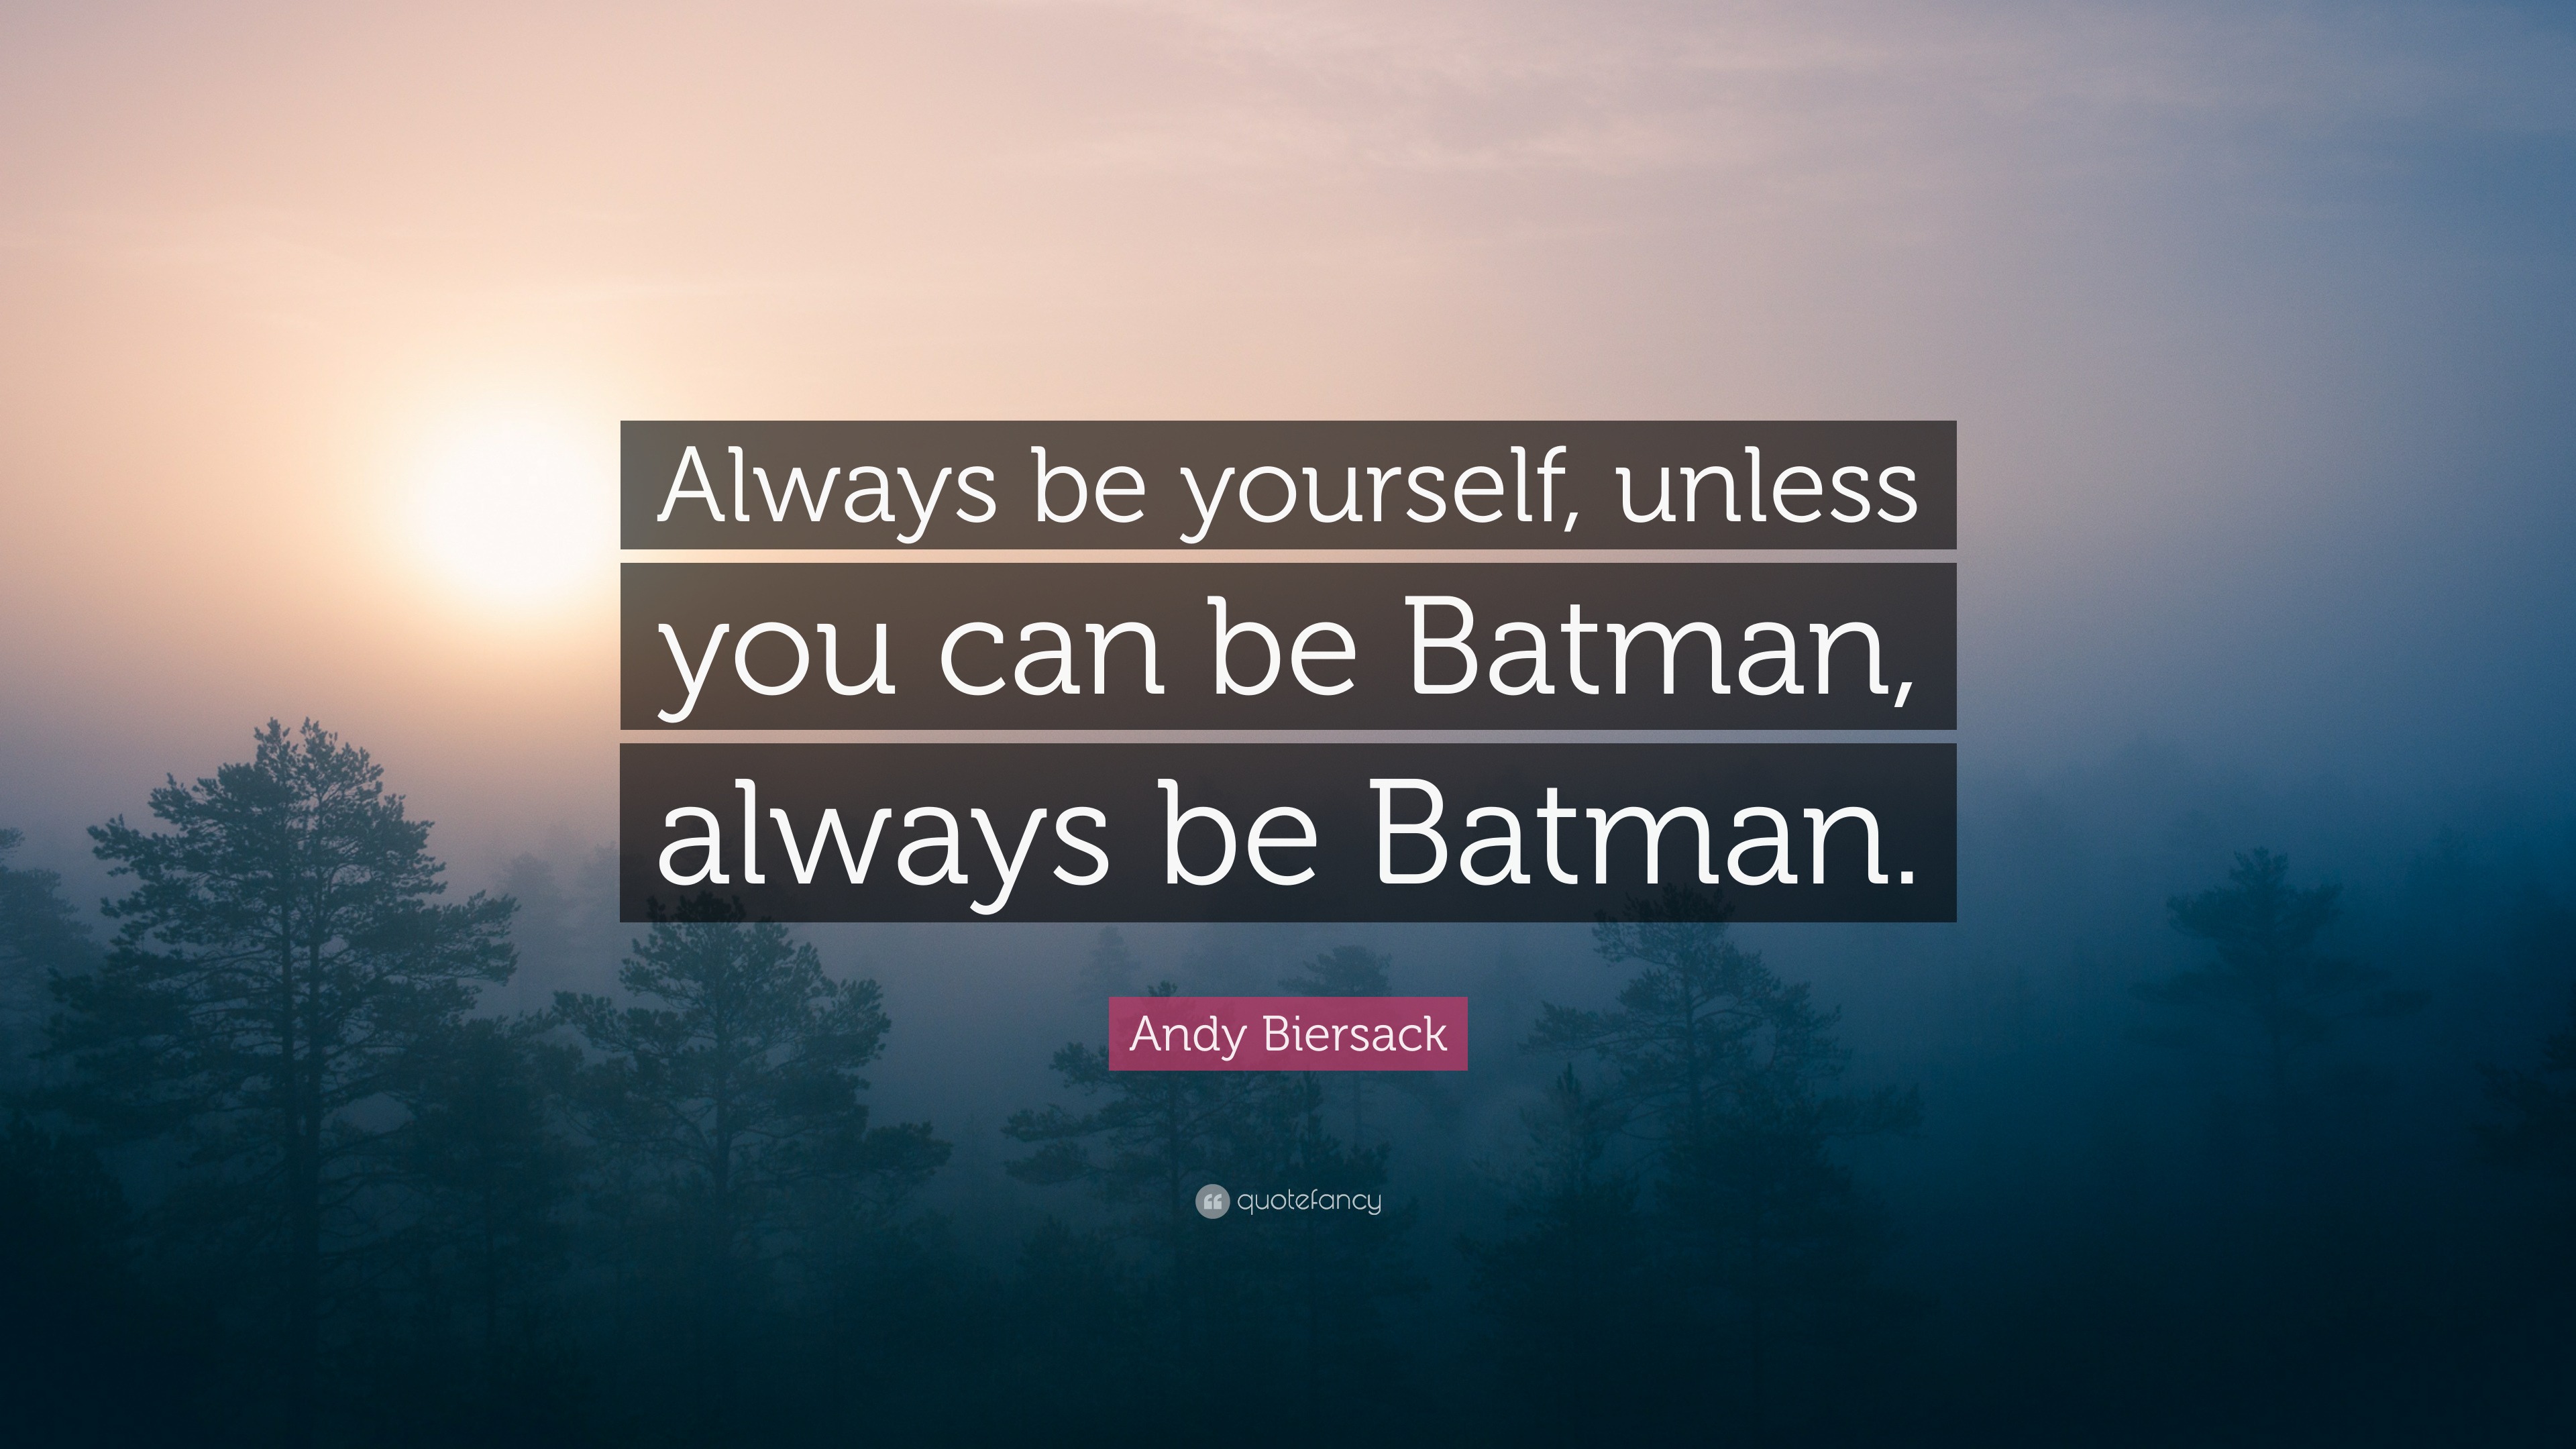 Andy Biersack Quote: “Always be yourself, unless you can be Batman, always  be Batman.”